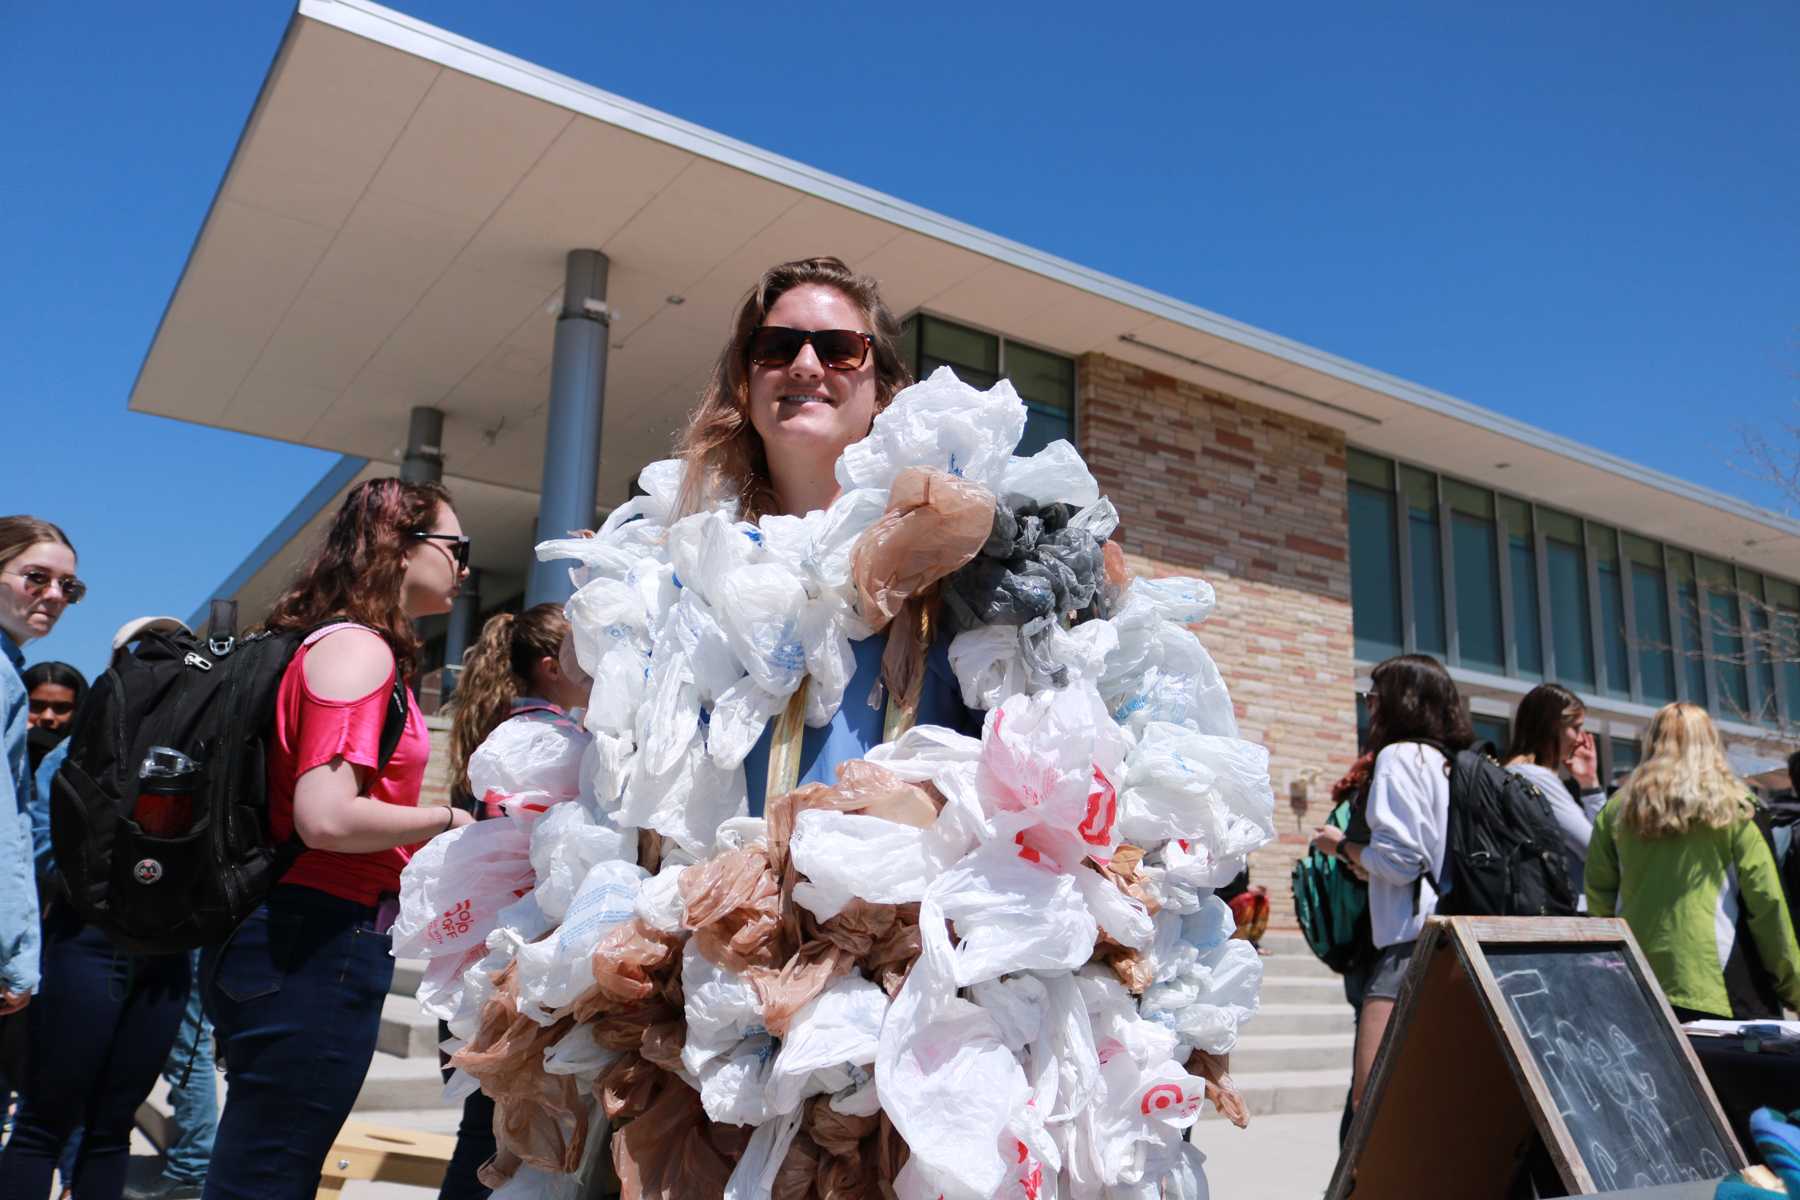 CSU Student smiles while wearing plastic bags